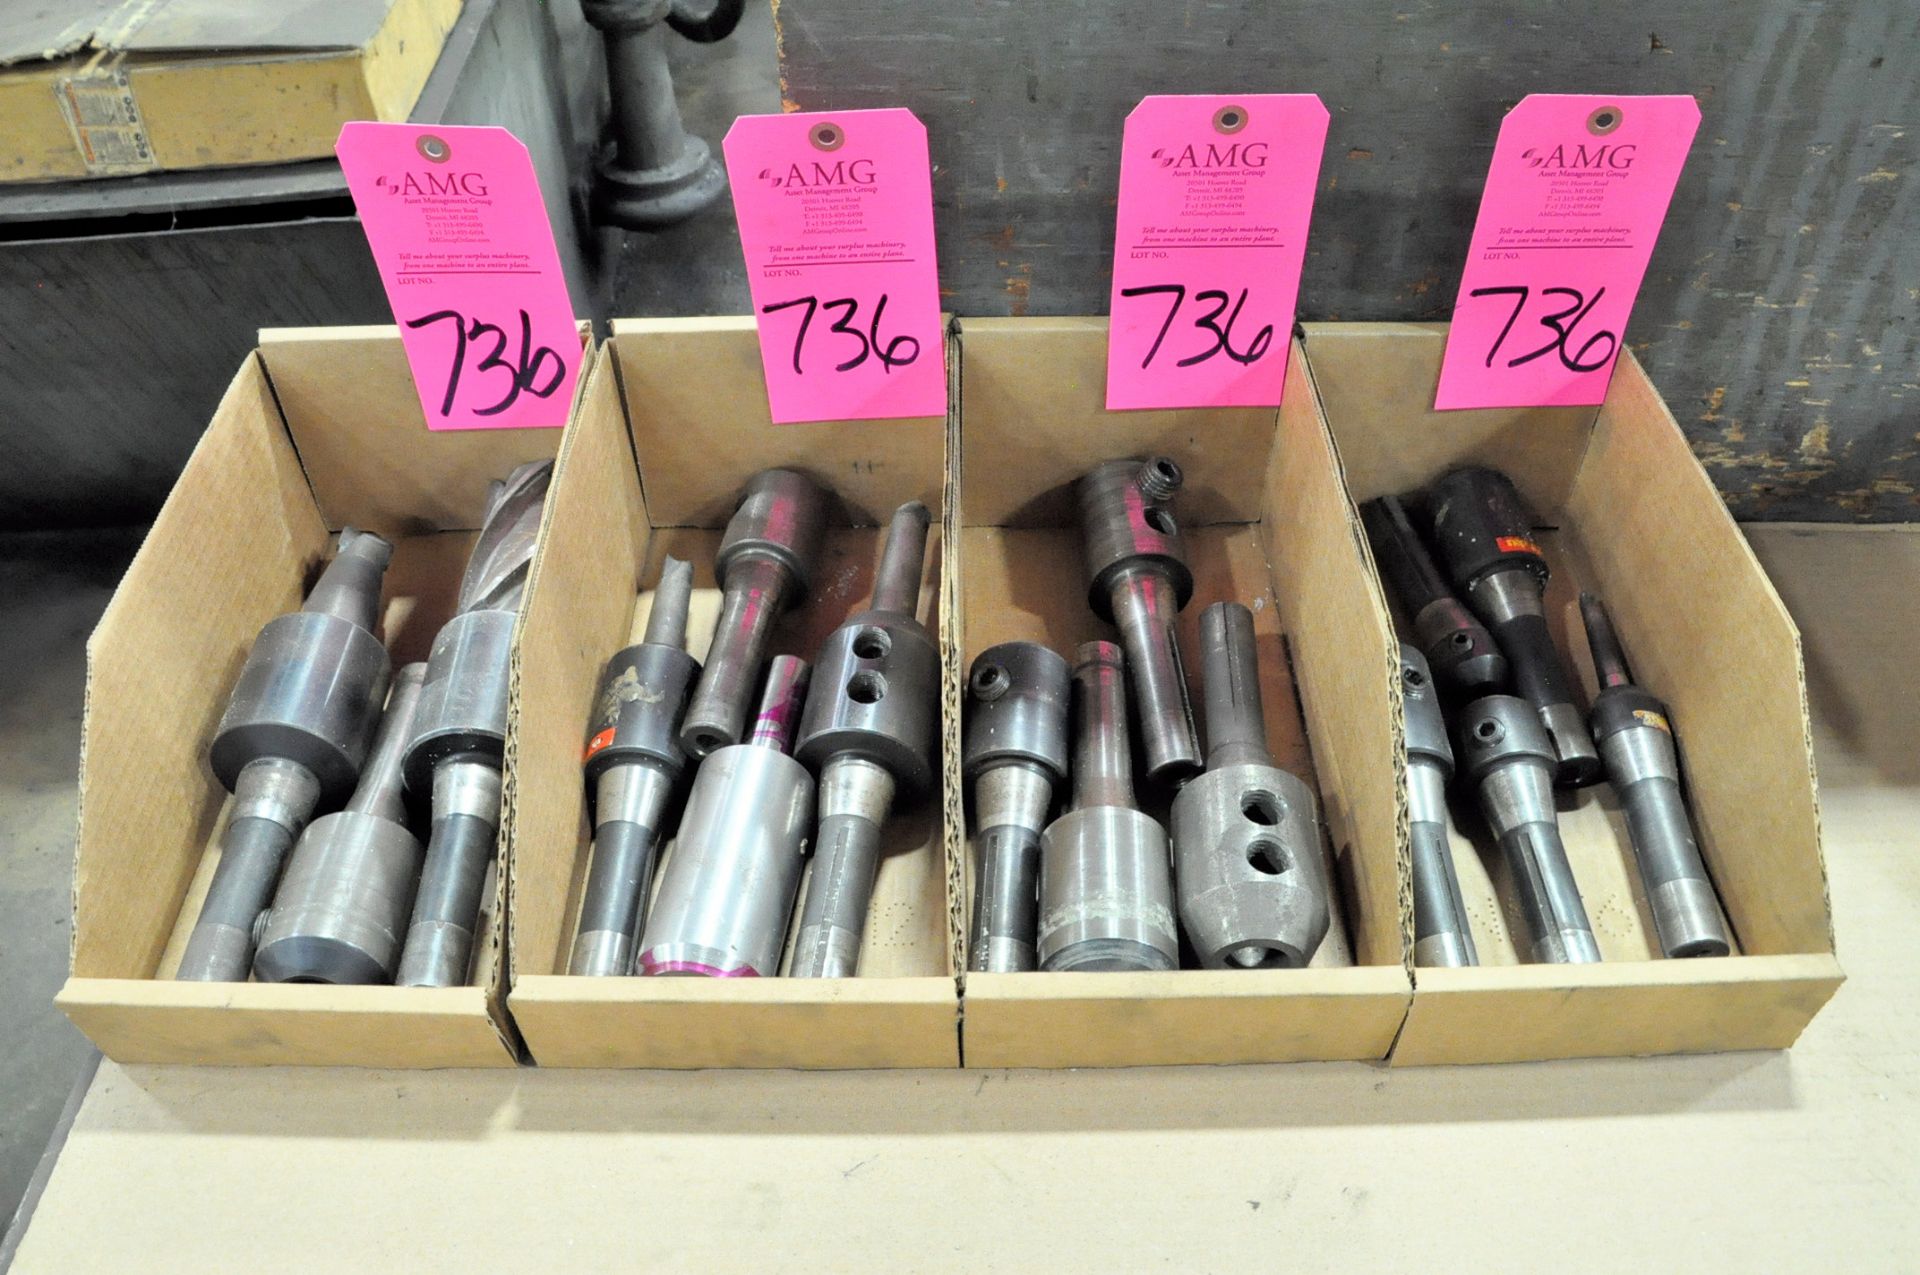 Lot-Various R8 Holders in (4) Boxes, (Grinding Room), (Pink Tag)